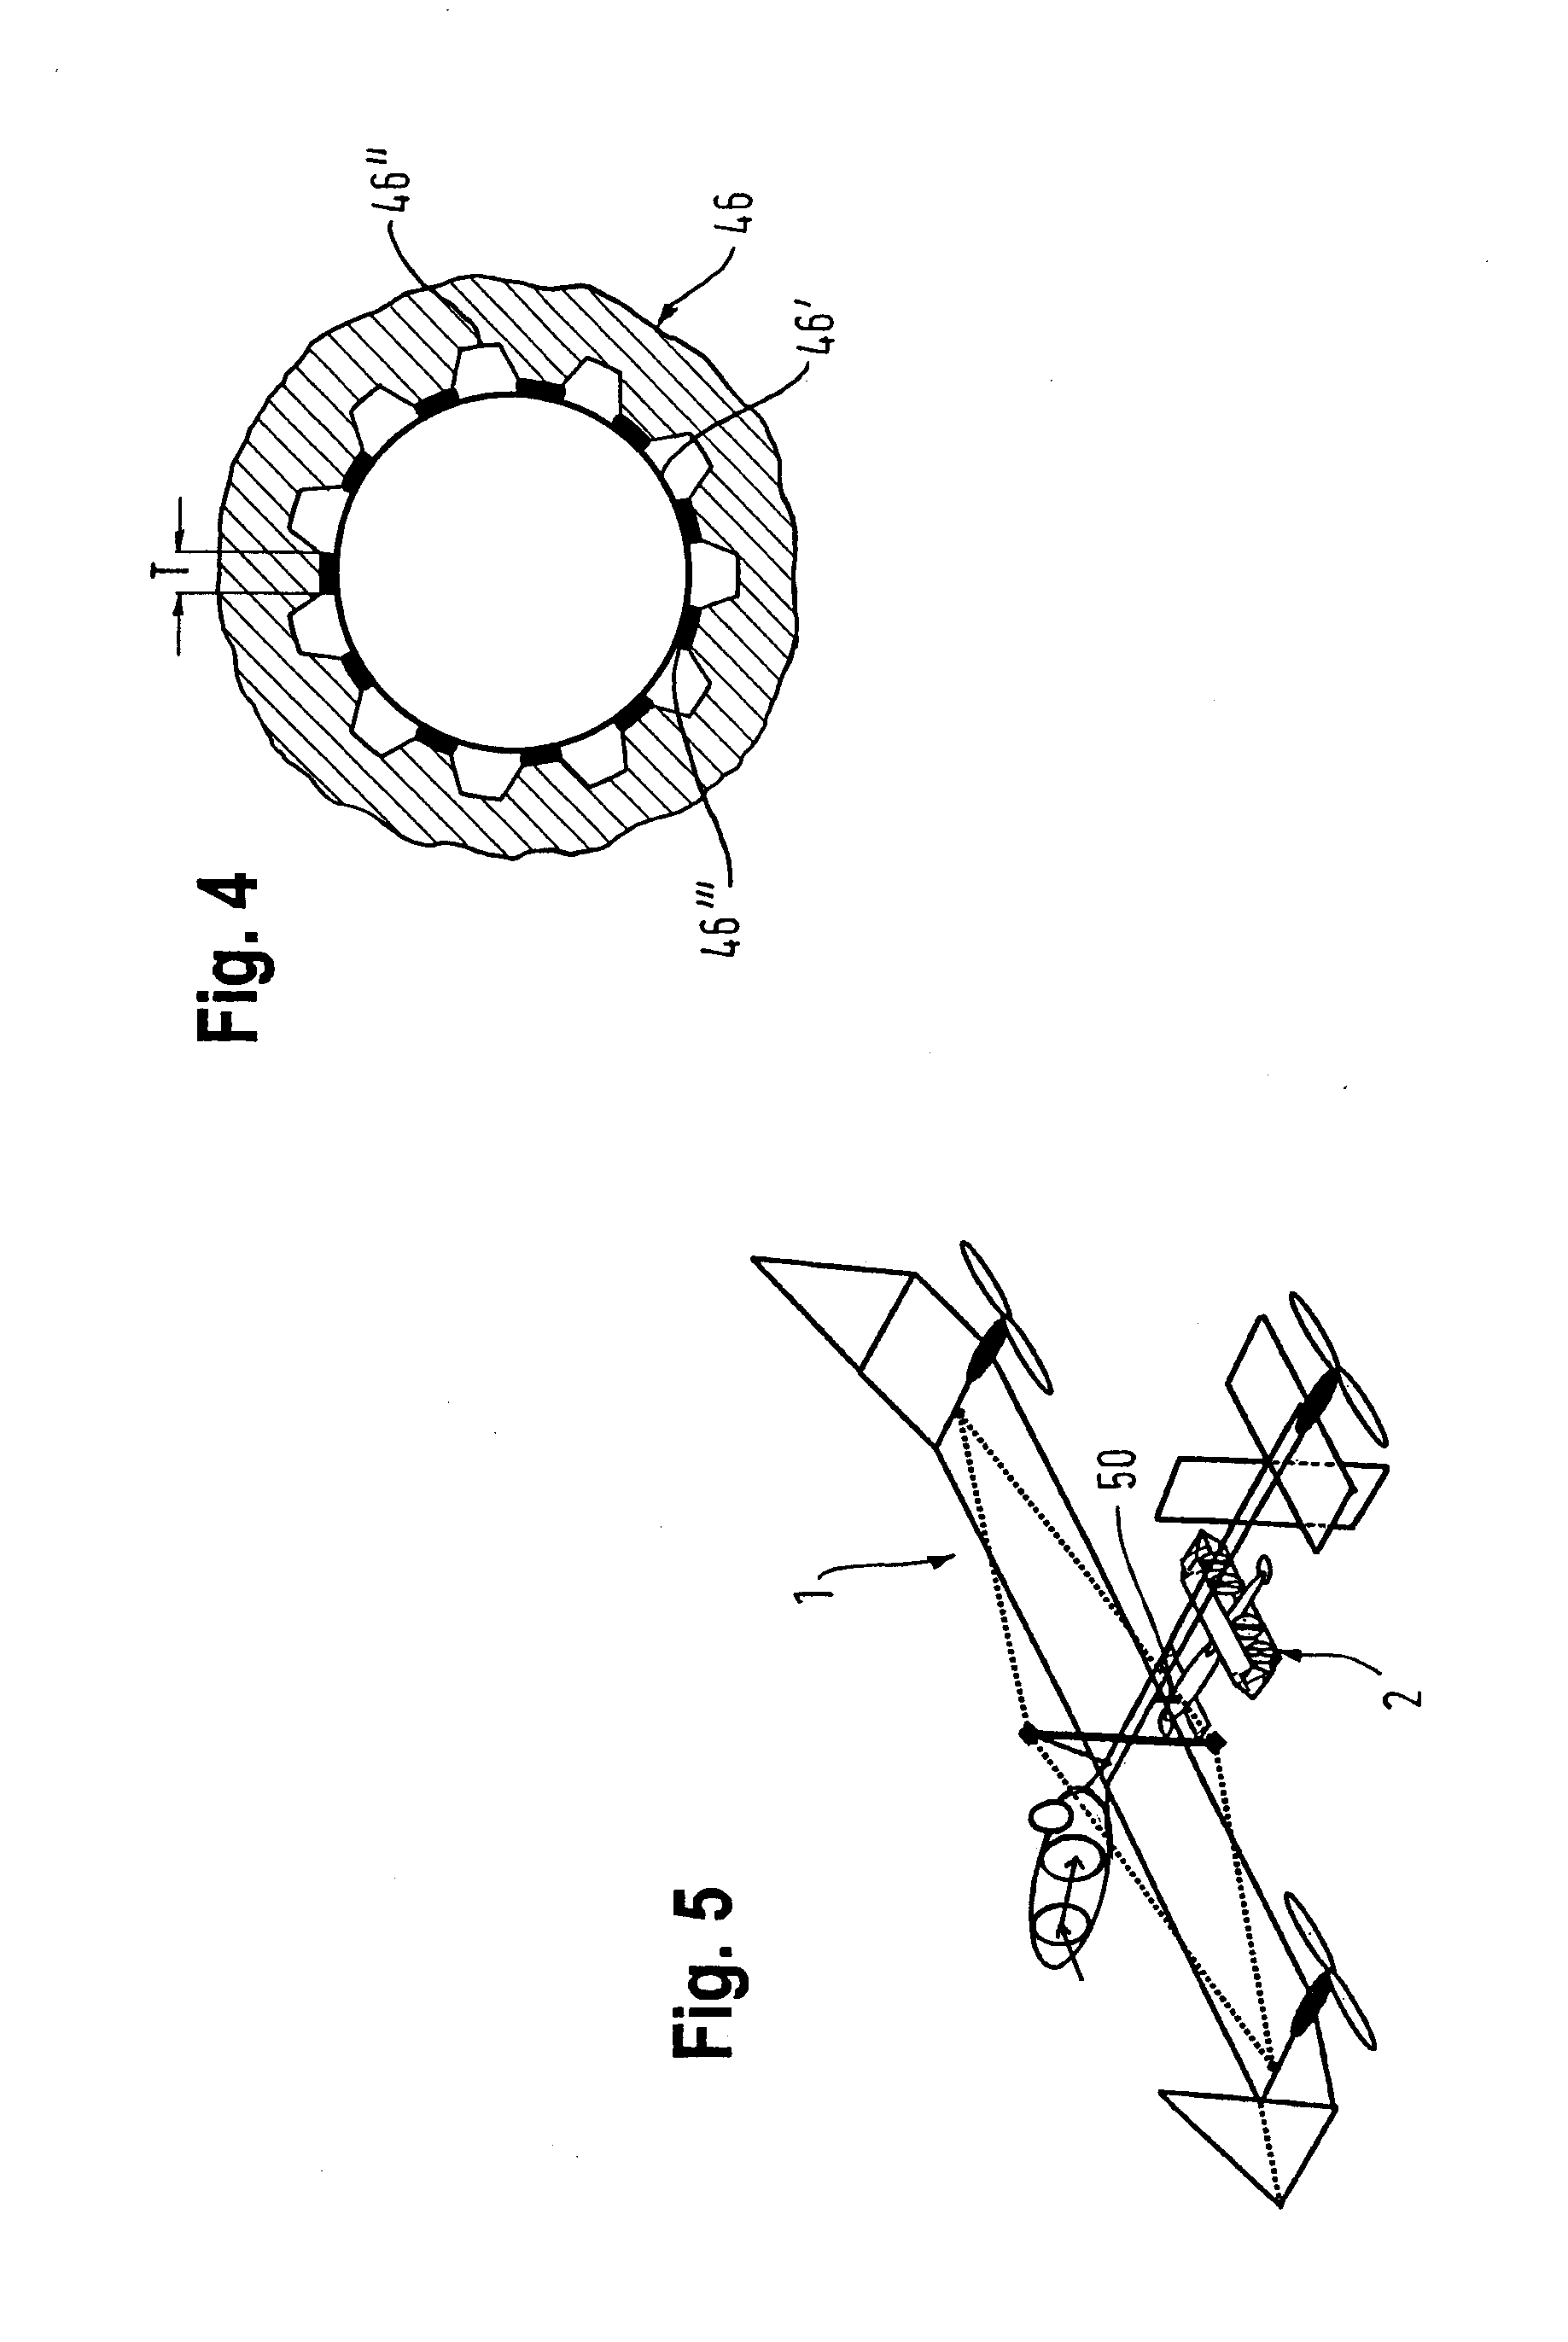 Air-to-Surface Surveillance and/or Weapons System and Method for Air-Based Inspection and/or Engagement of Objects on Land or Sea